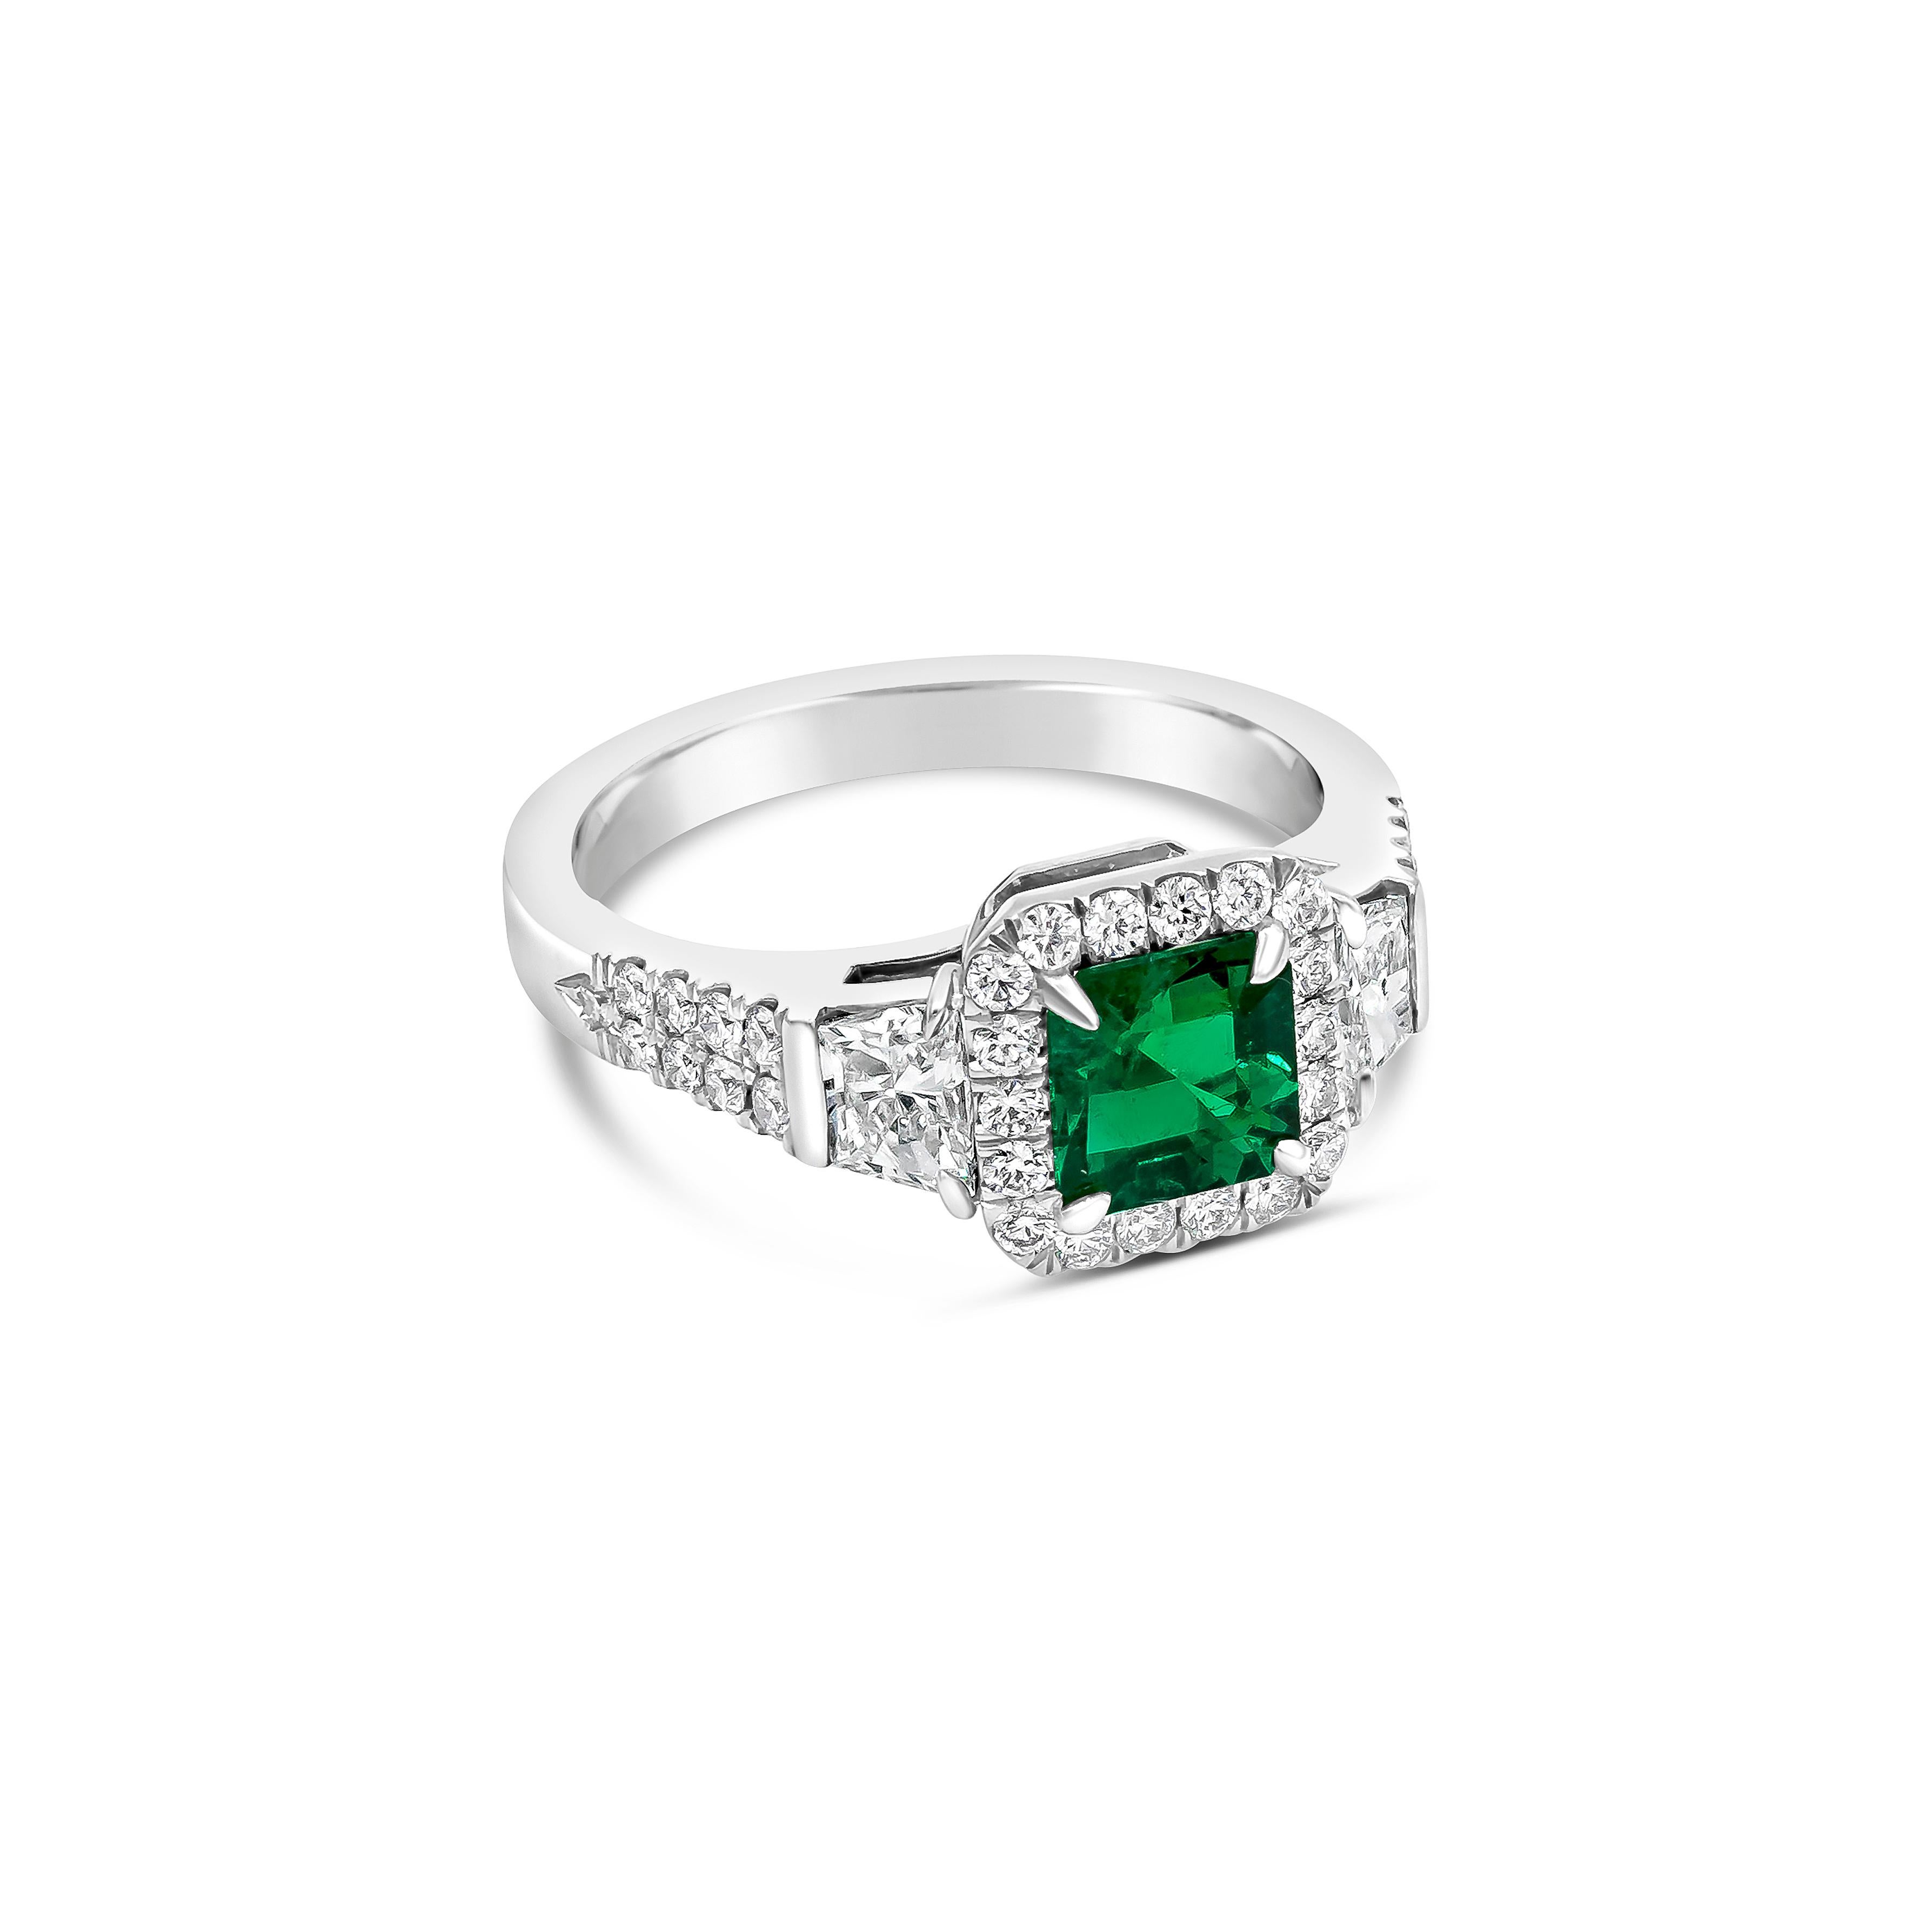 Showcases a square-shaped green emerald weighing 0.80 carats, surrounded by a single row of round diamonds. Center emerald flanked by brilliant trapezoid diamonds on an accented platinum band. Diamonds weigh 1.18 carats total. Size 6.25 US.

Style